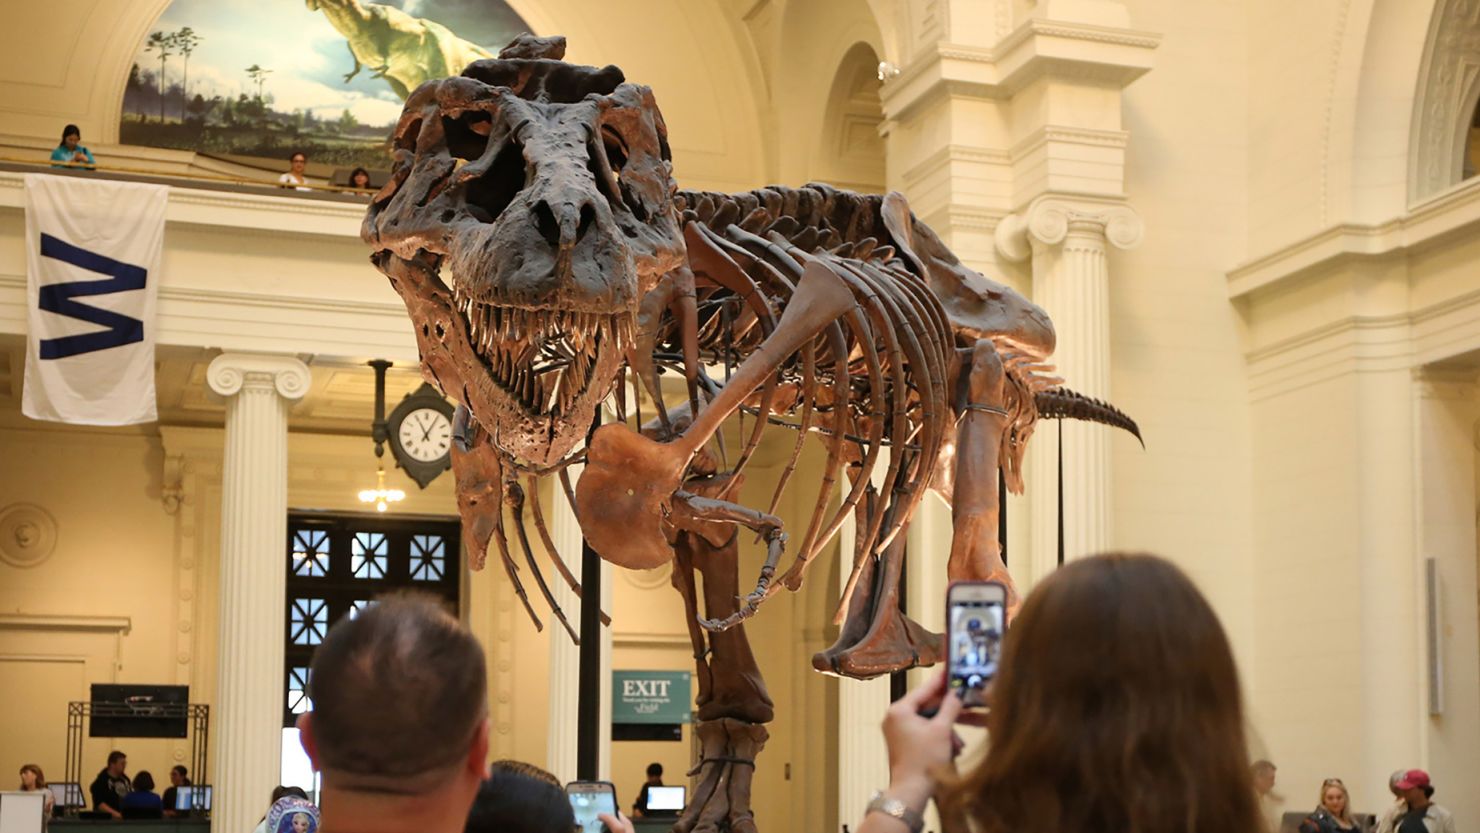 Sue the T. rex strikes a pose at Chicago's Field Museum of Natural History. Most dinosaurs disappeared 66 million years ago in a mass extinction event caused by an asteroid that slammed into Earth.